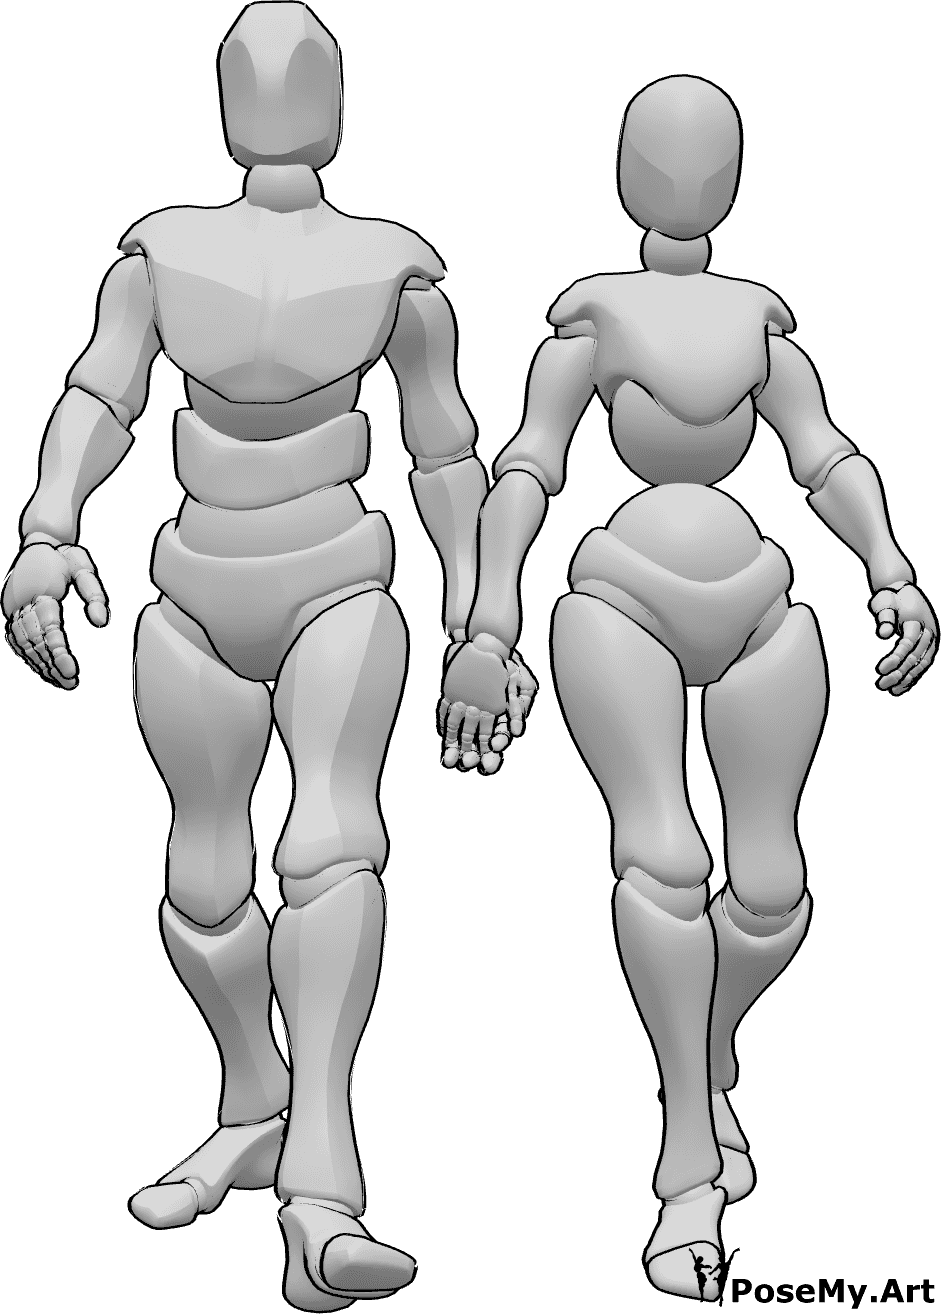 Pose Reference - Confident couple walking pose - Couple is walking together confidently and holdinh each others hands